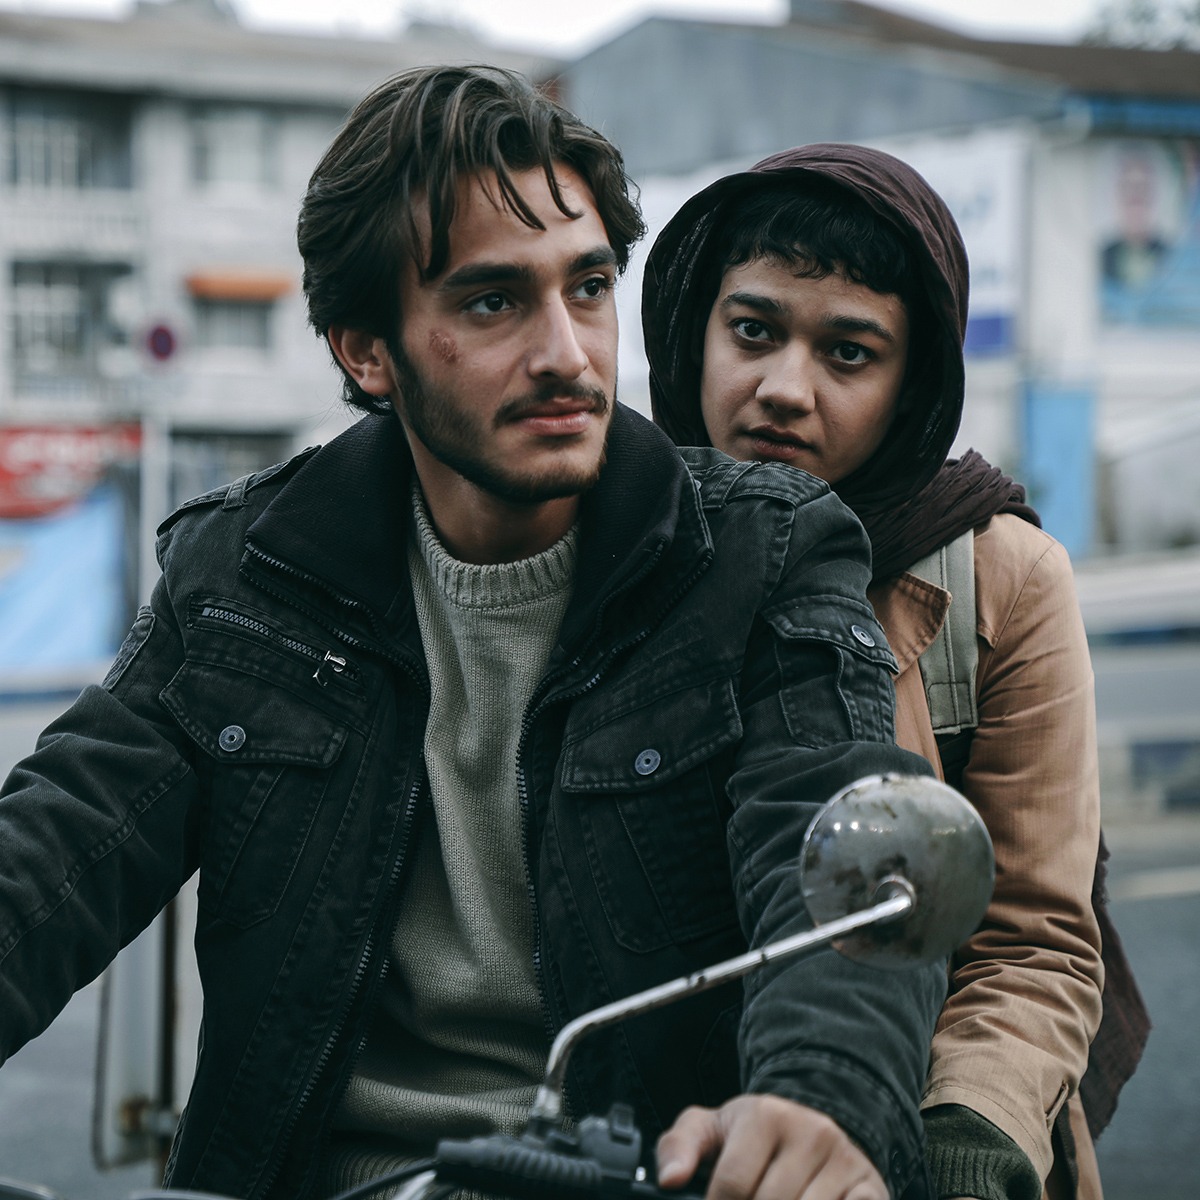 A man and a woman sitting on a motorcycle in a city.